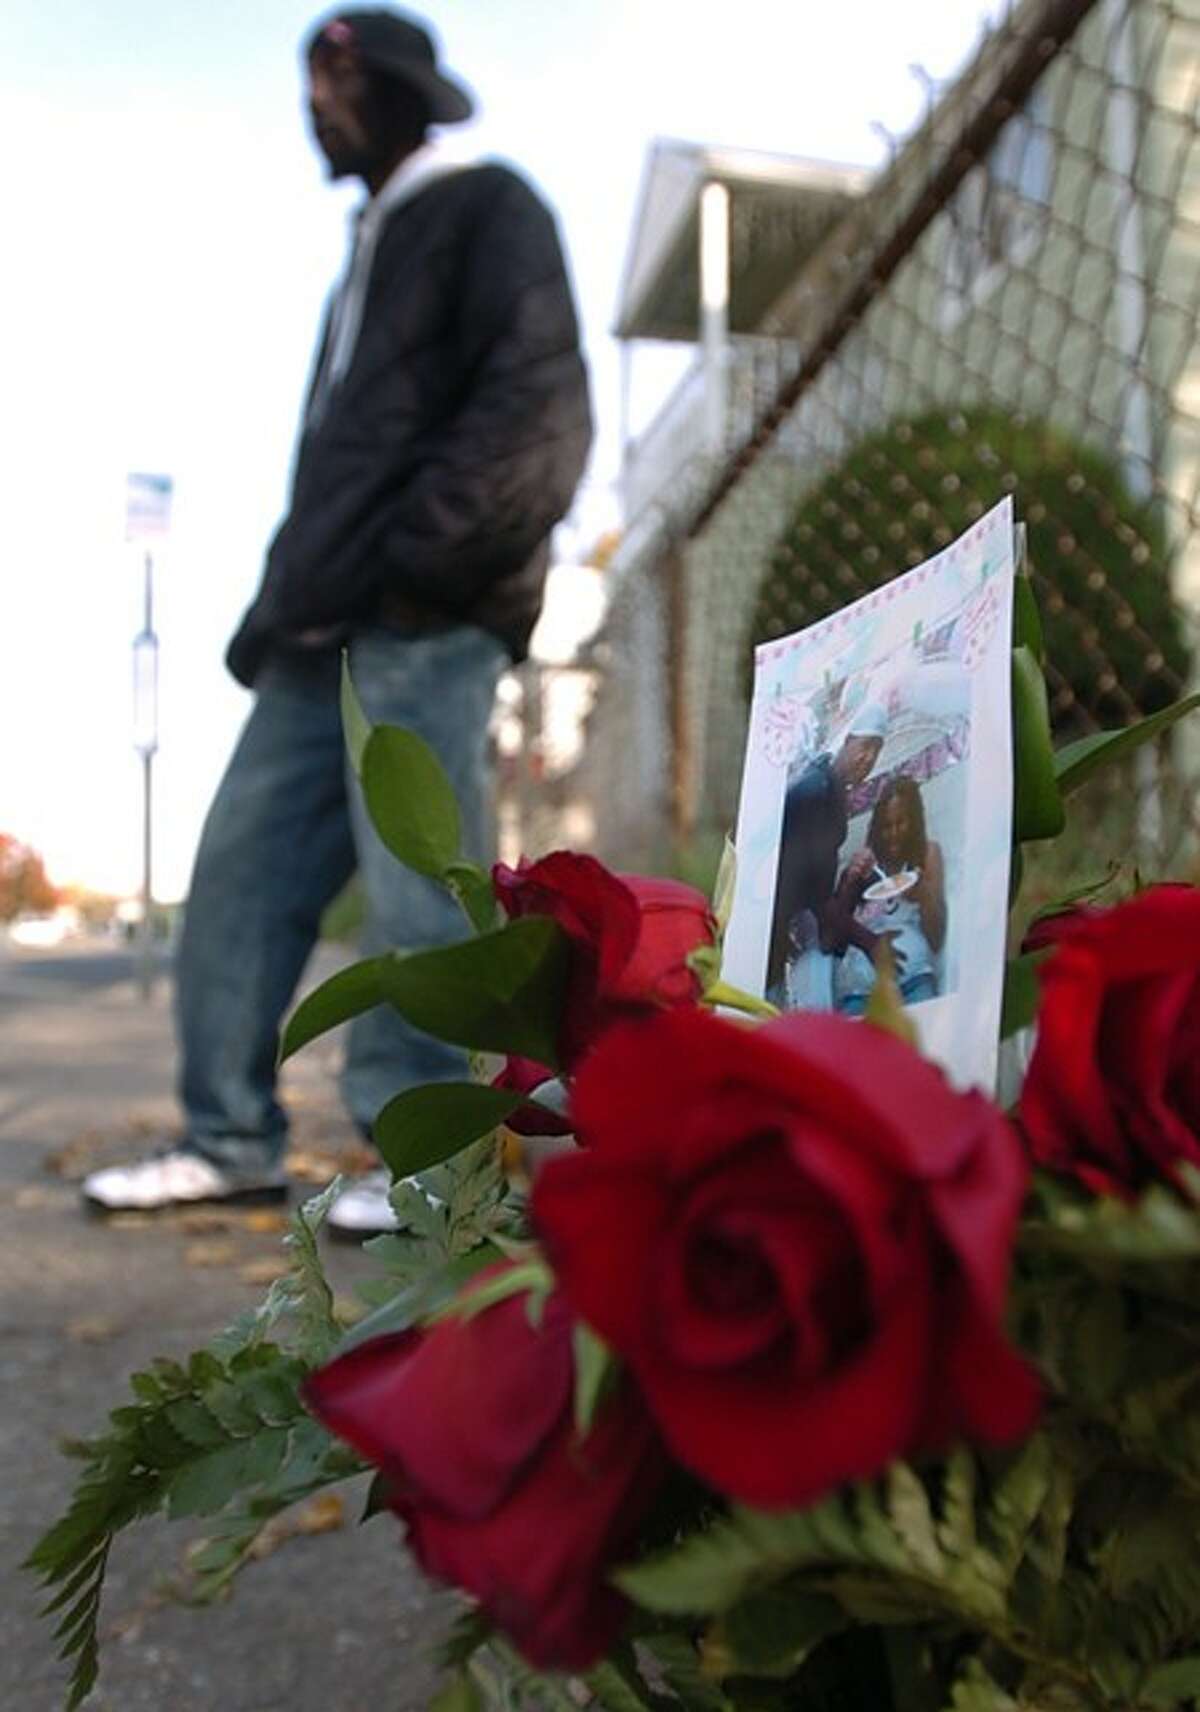 Friends Michael "Mizzy" Robinson, gather at a memorial to him the morning after he was gunned down at South Main and Grove streets in South Norwalk. Hour photo / Erik Trautmann